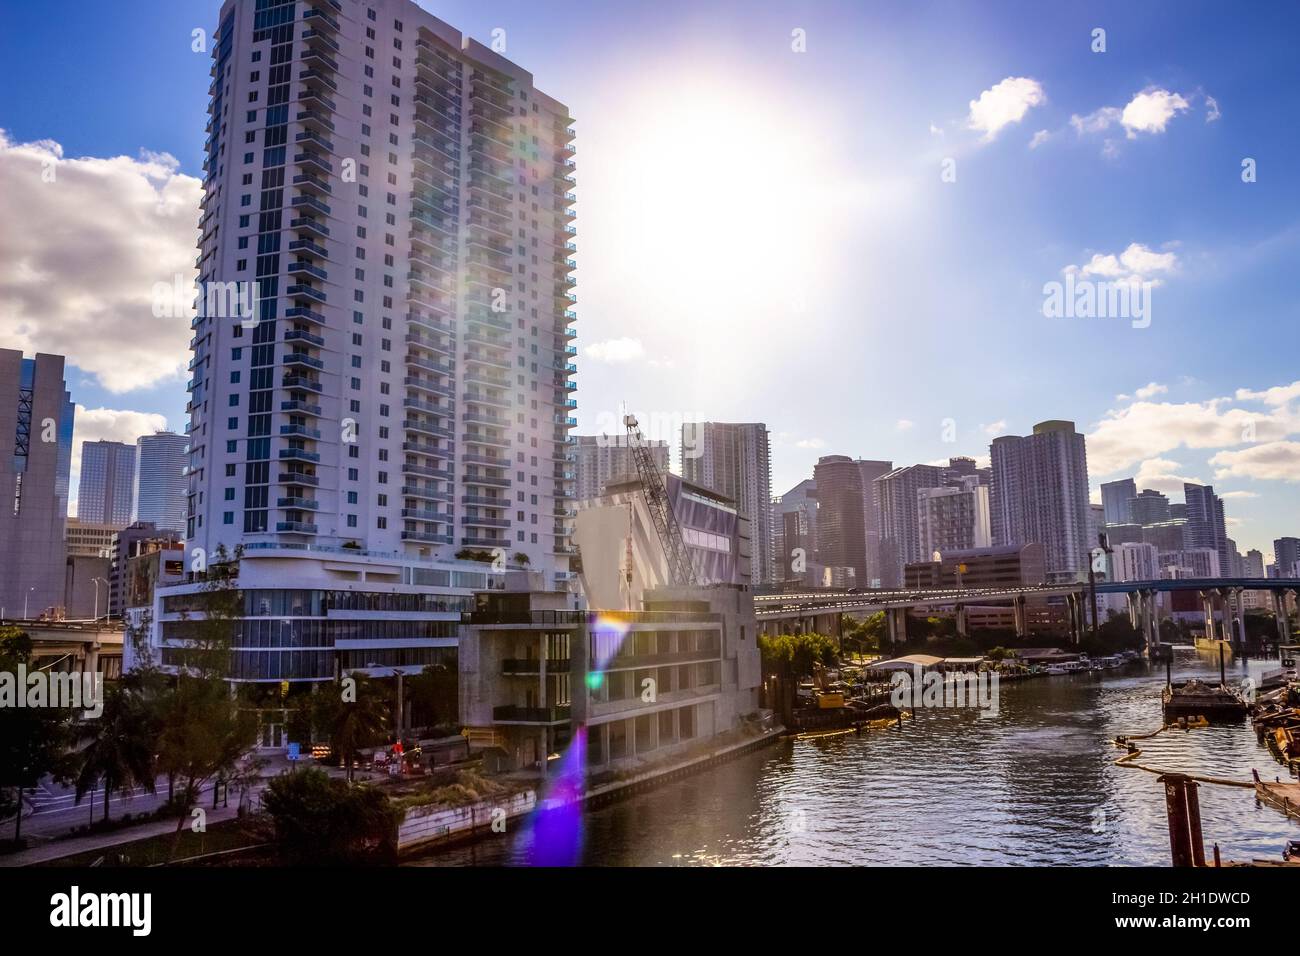 Downtown Miami cityscape view with condos and office buildings against blue sky. Stock Photo